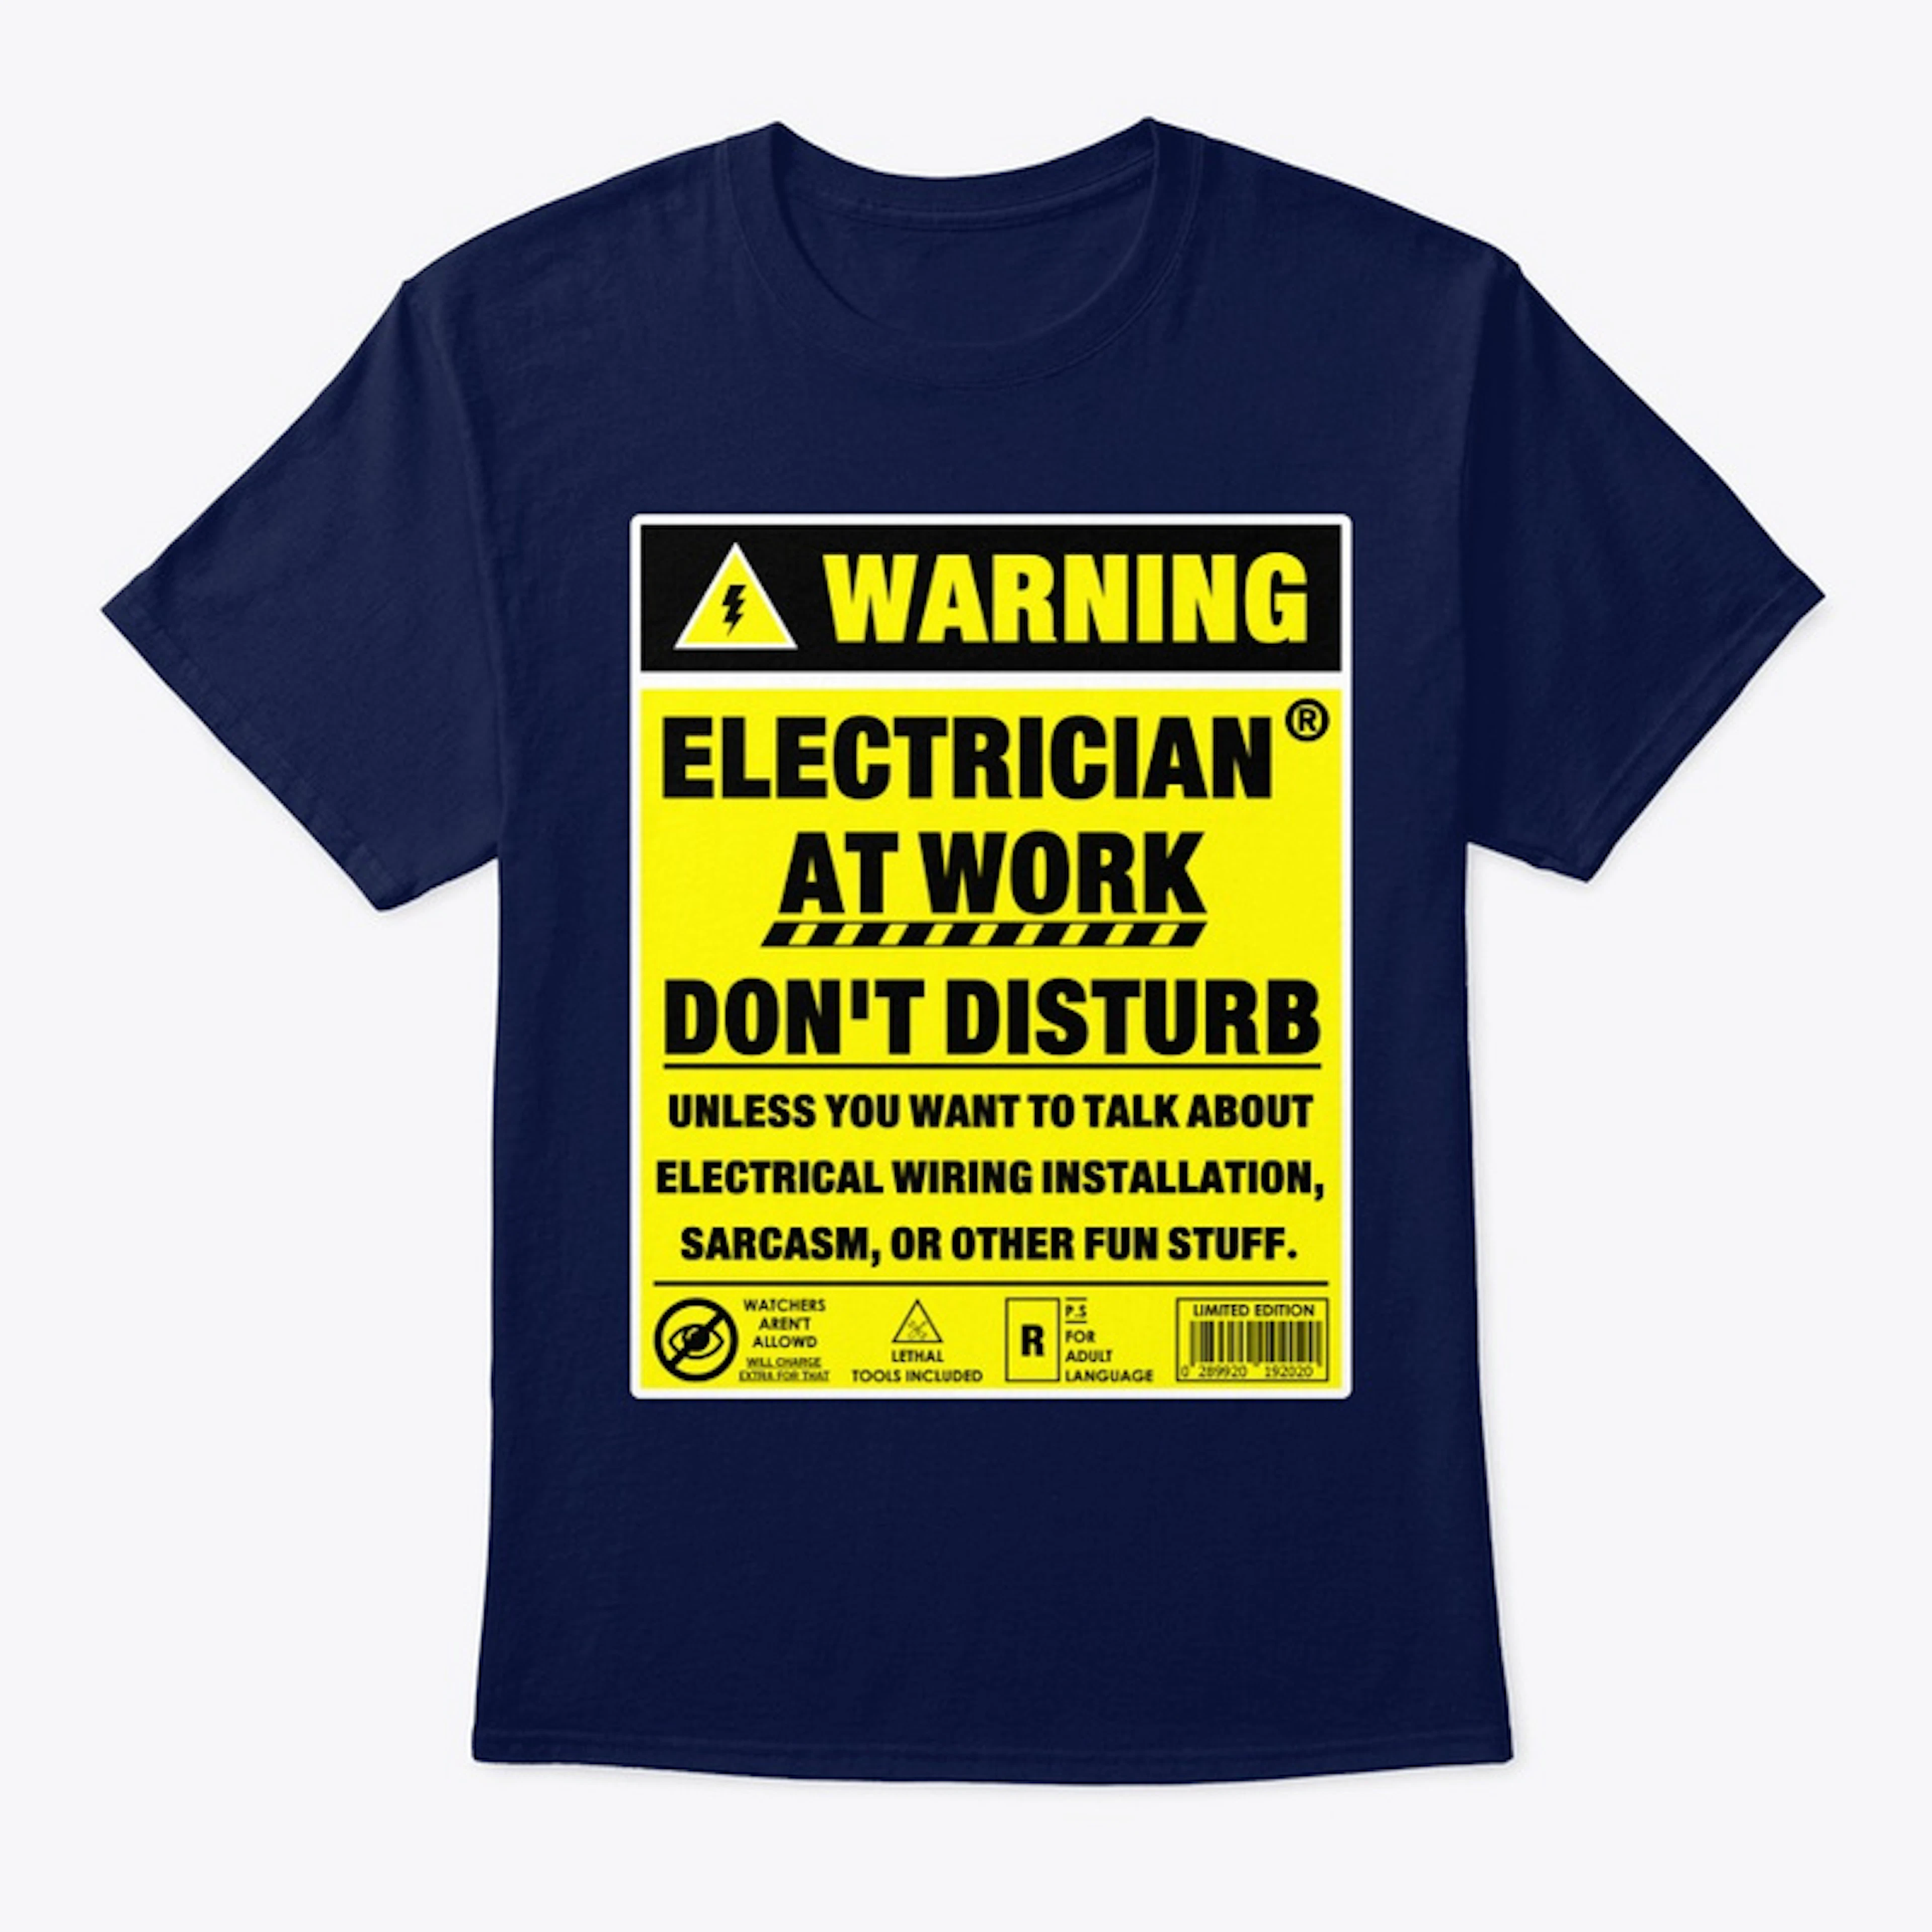 Electrical at Work - Funny Shirt